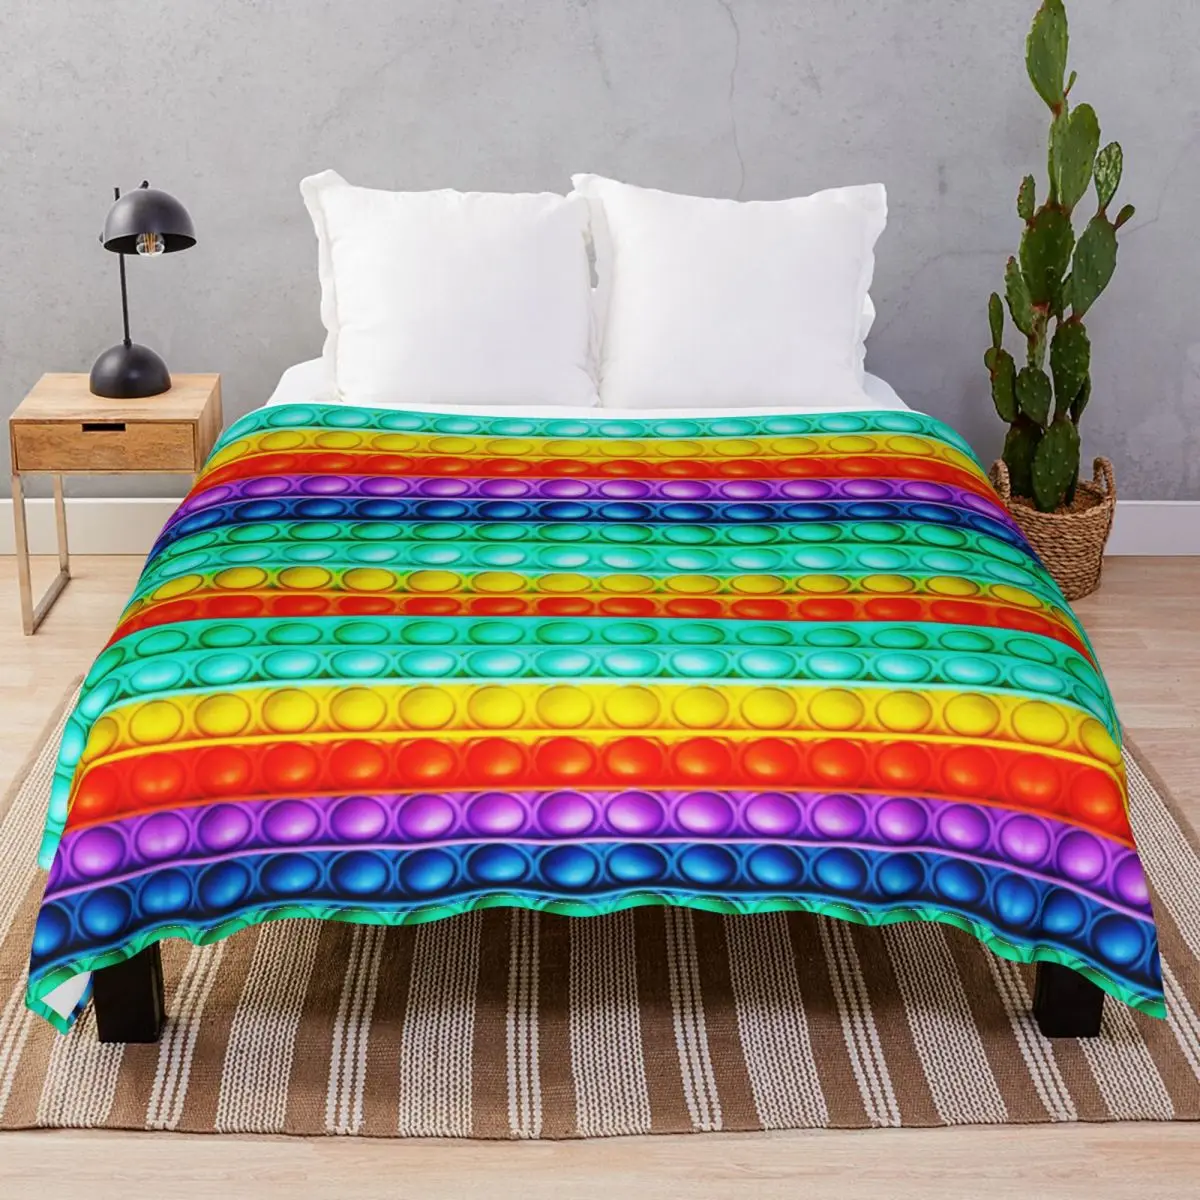 Pop It Multicolored Original Blankets Fleece Spring Autumn Portable Throw Blanket for Bedding Home Couch Travel Cinema